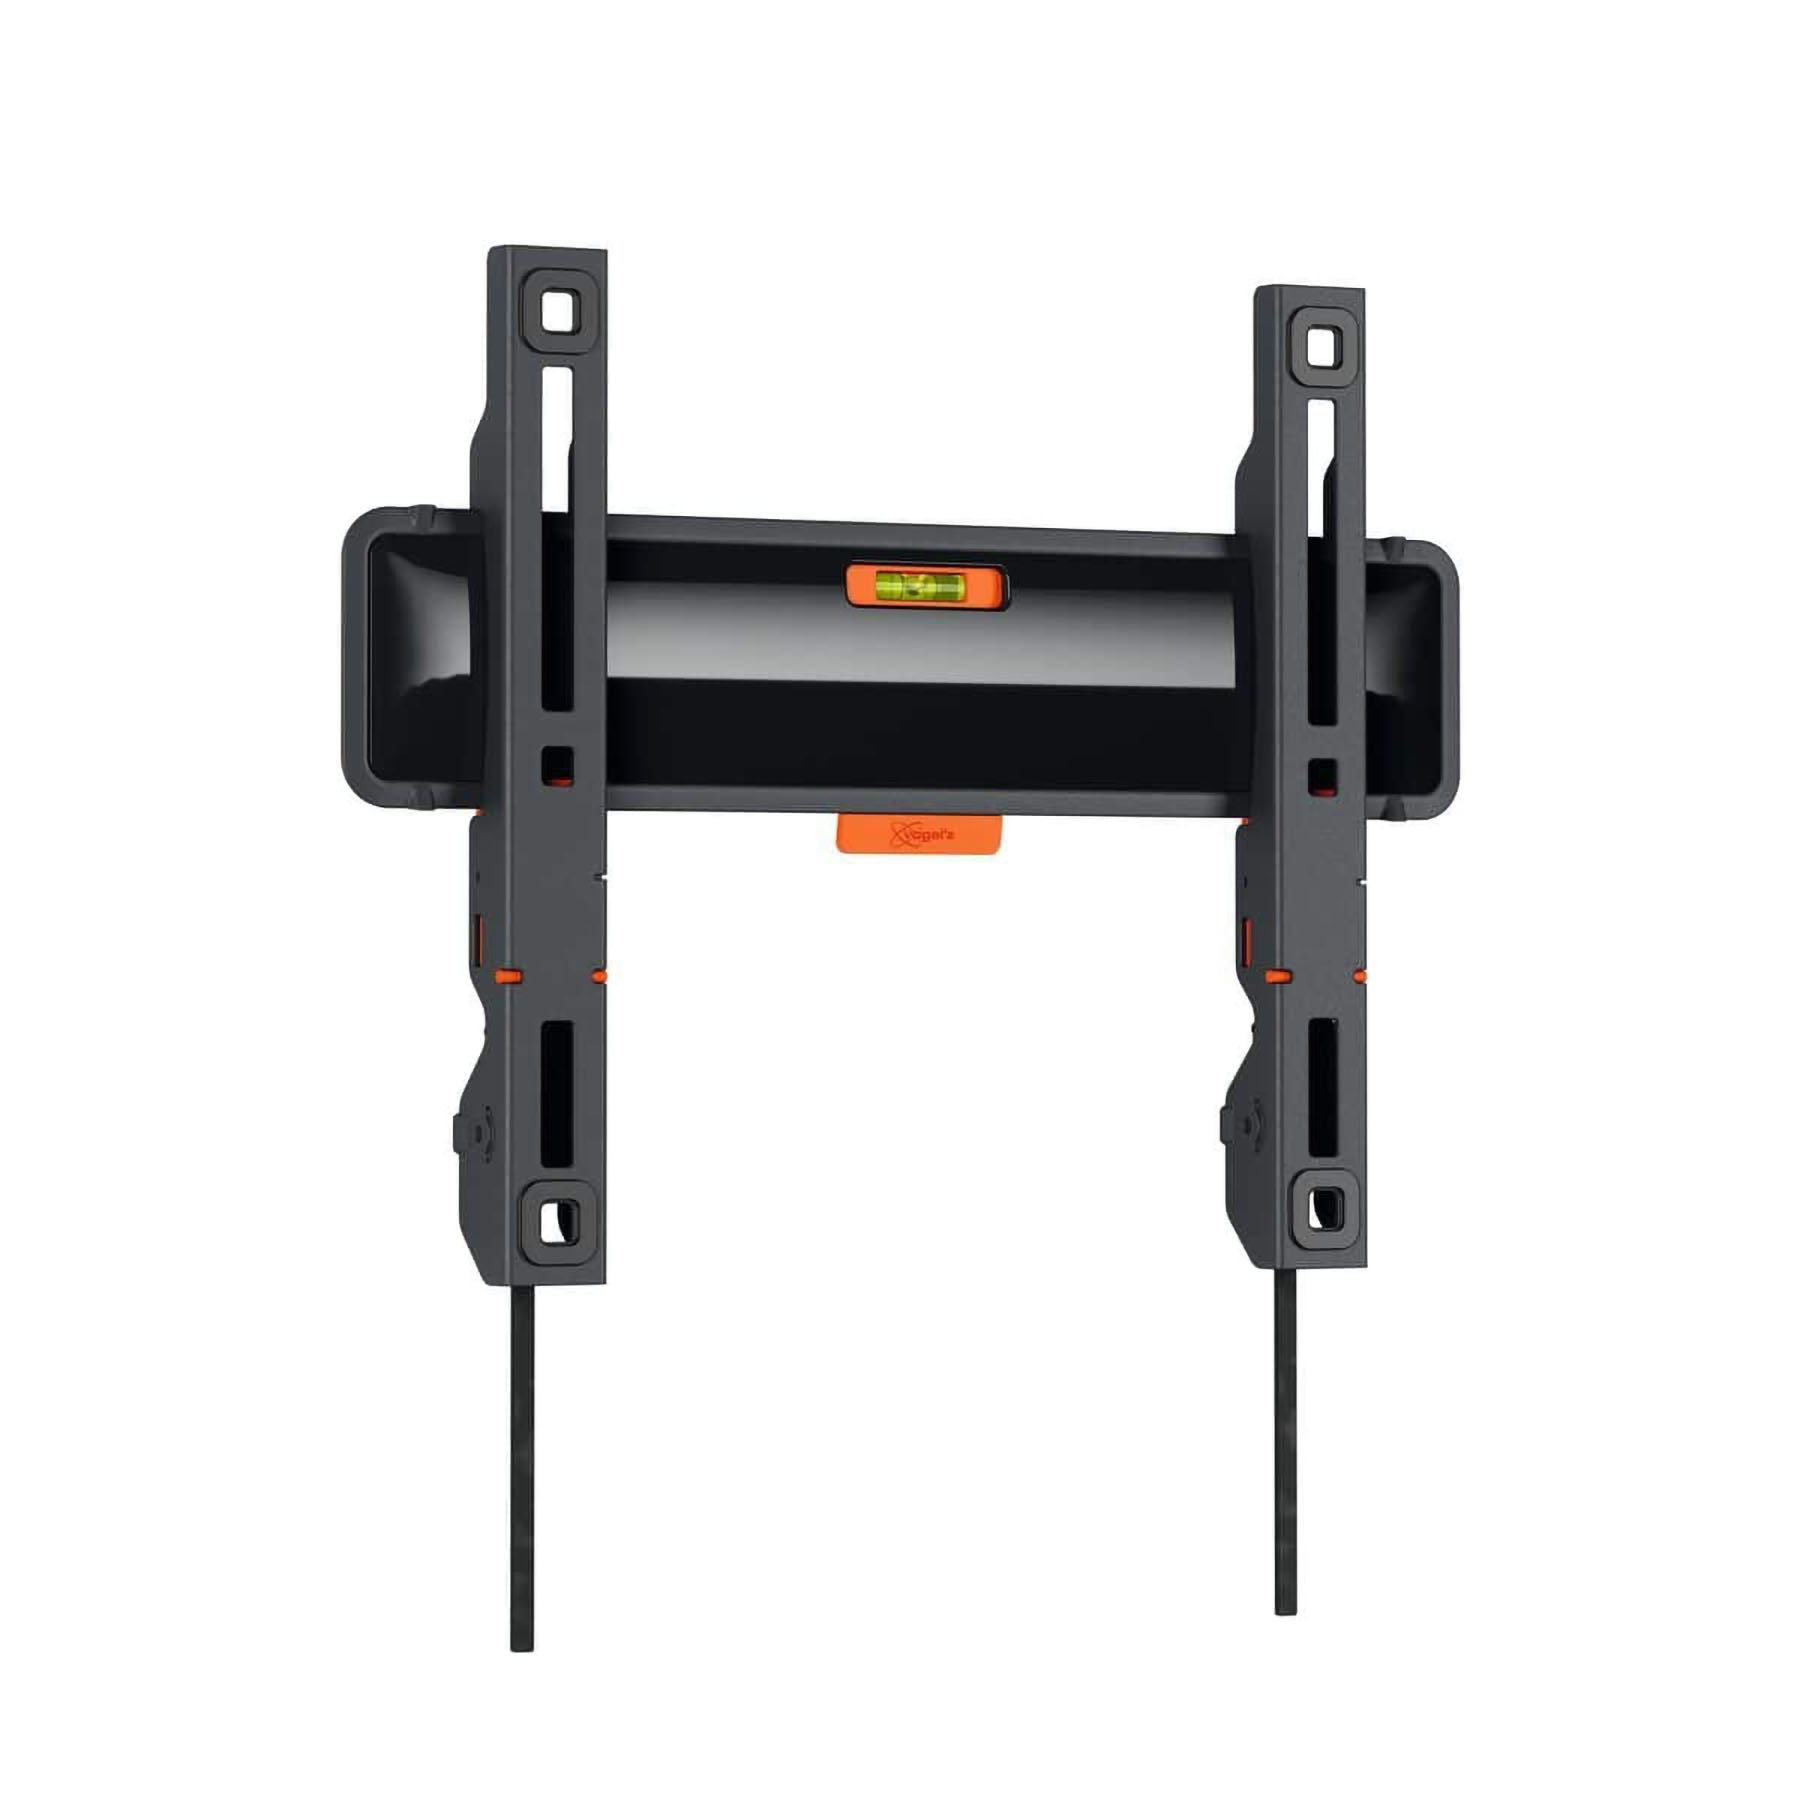 Vogel's TVM 3205 Fixed TV Wall Mount